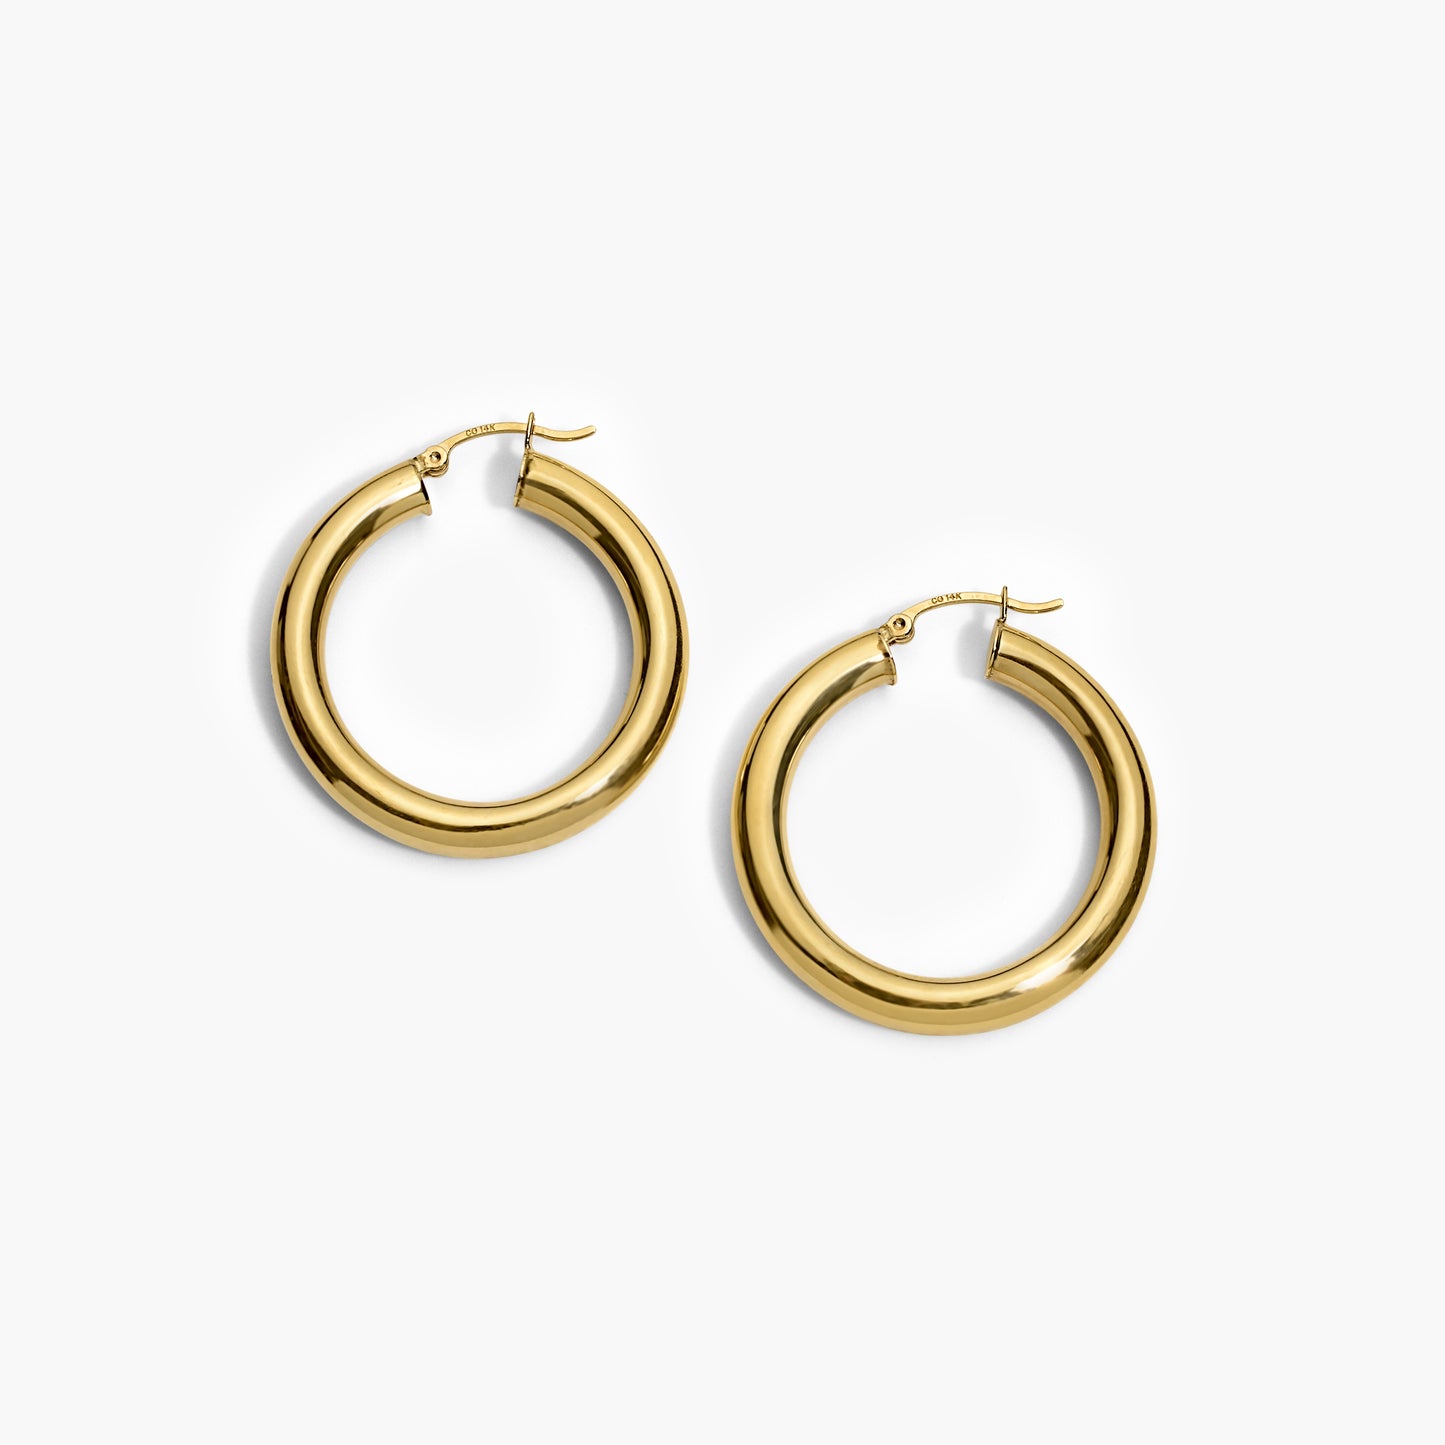 NLF - Have on Model/Use photo with 3 hoops - *AS Need photos and description* Baby Gold Hoops